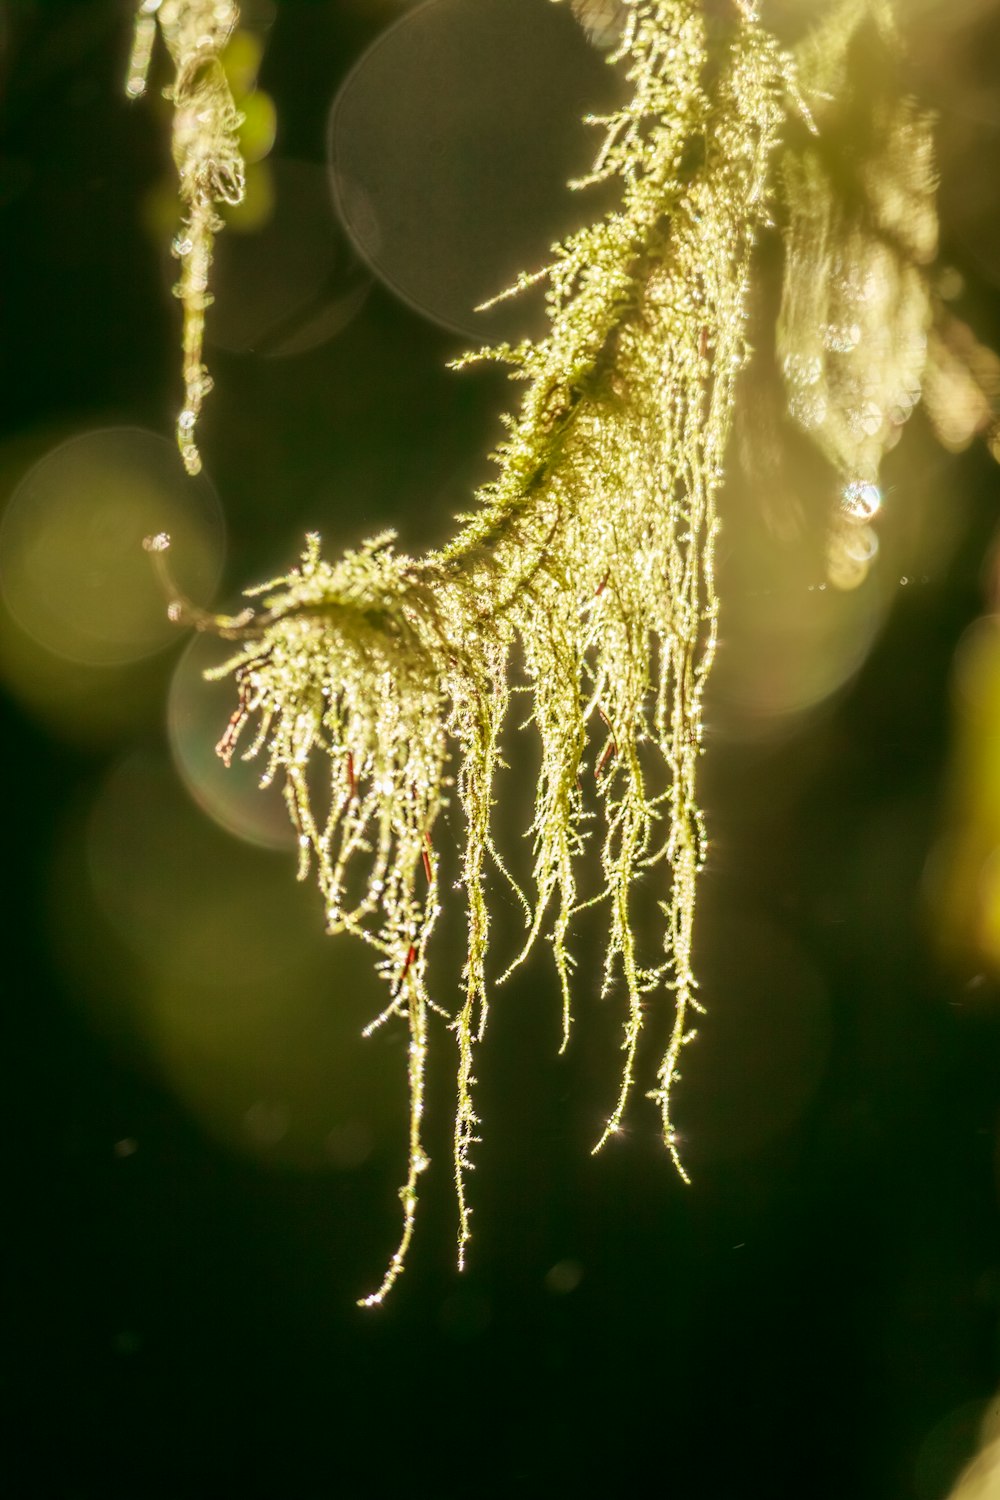 moss growing on a tree branch in the sunlight